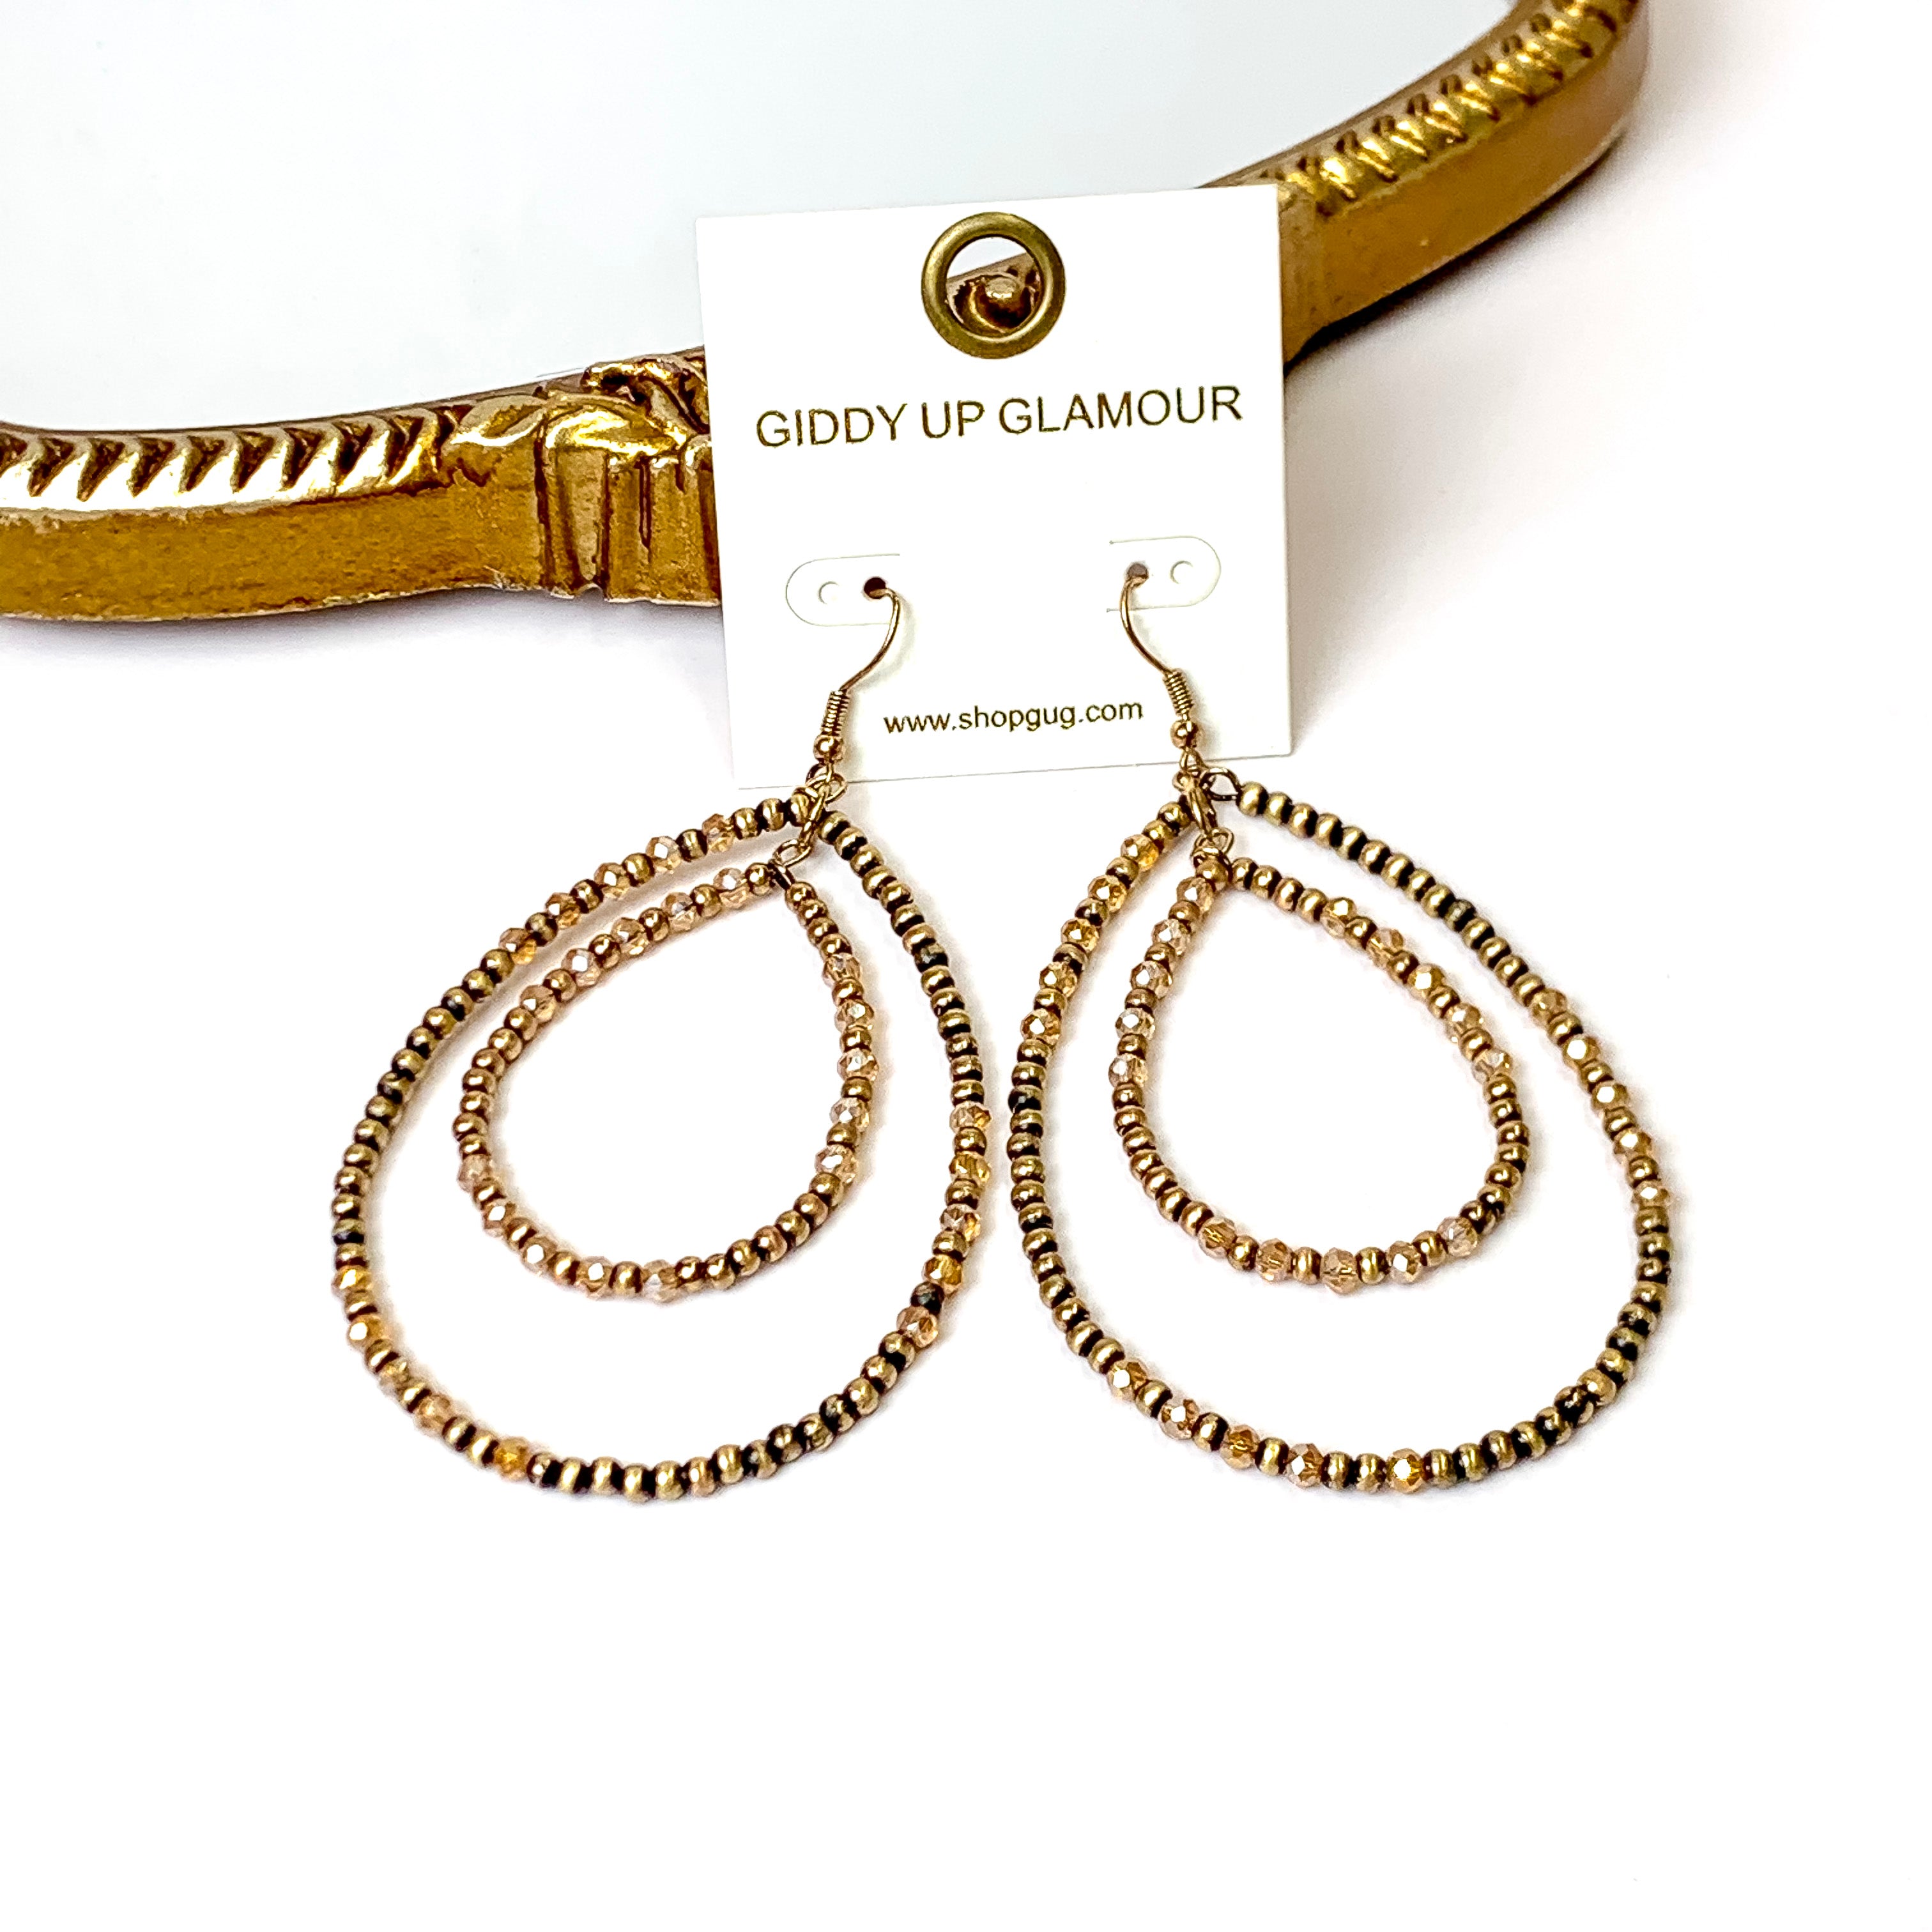 Layered Faux Navajo Pearl Beaded Teardrop Earrings with Champagne Glass Spacers in Gold Tone - Giddy Up Glamour Boutique